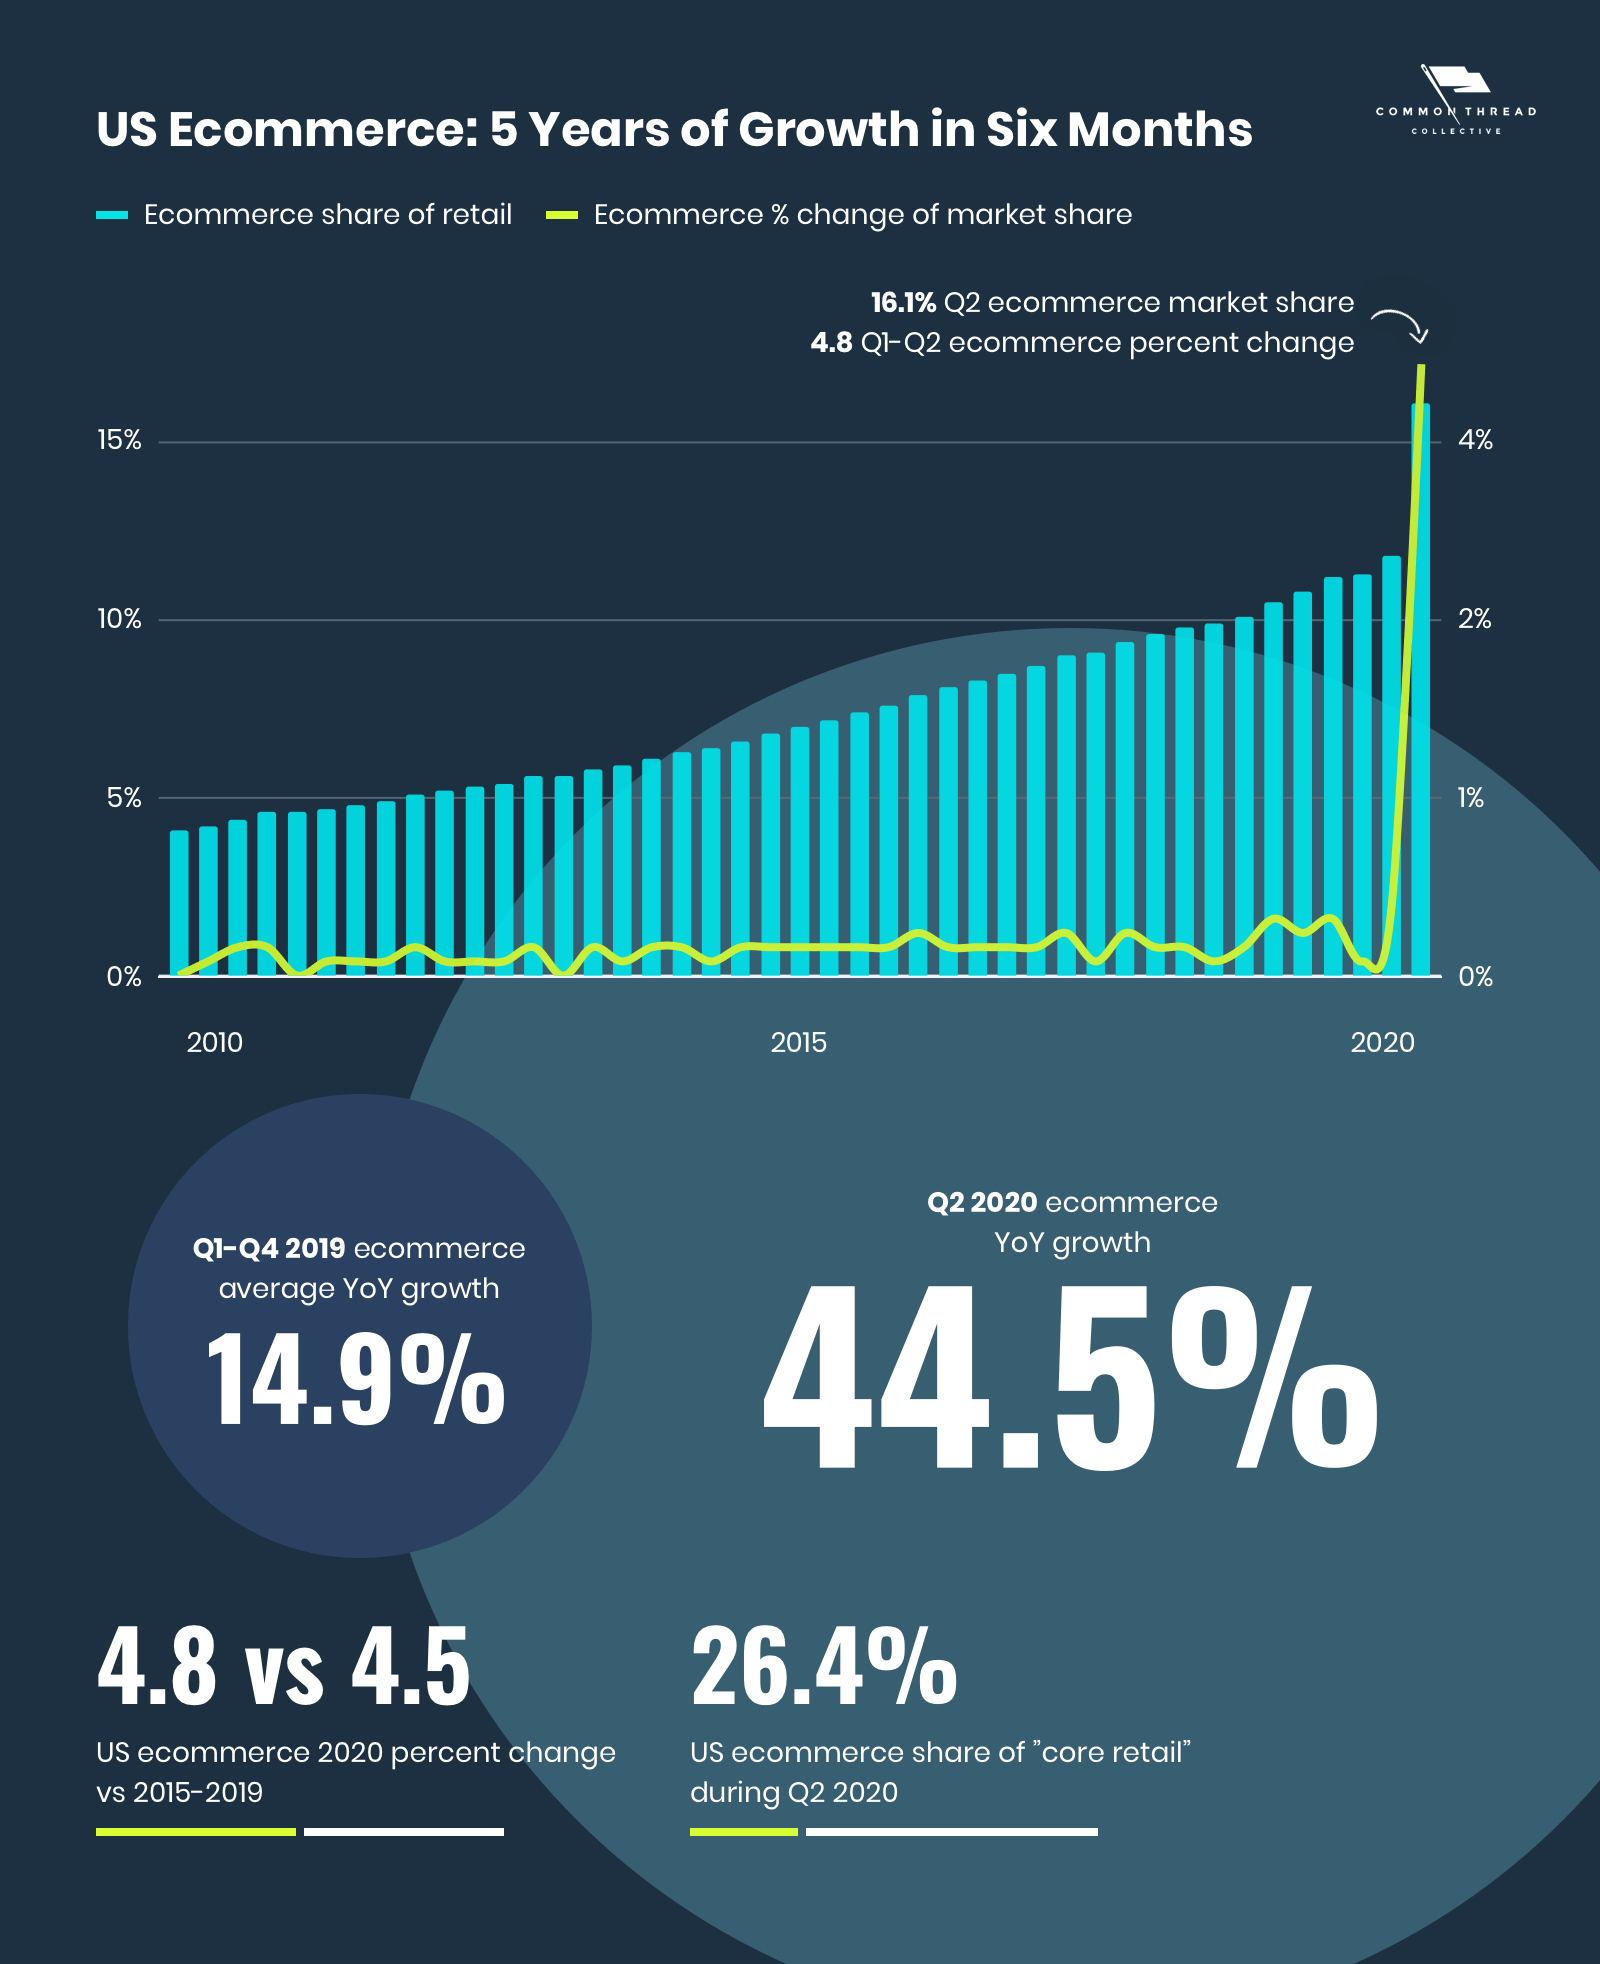 US Ecommerce - 5 Years of Growth in Six Months